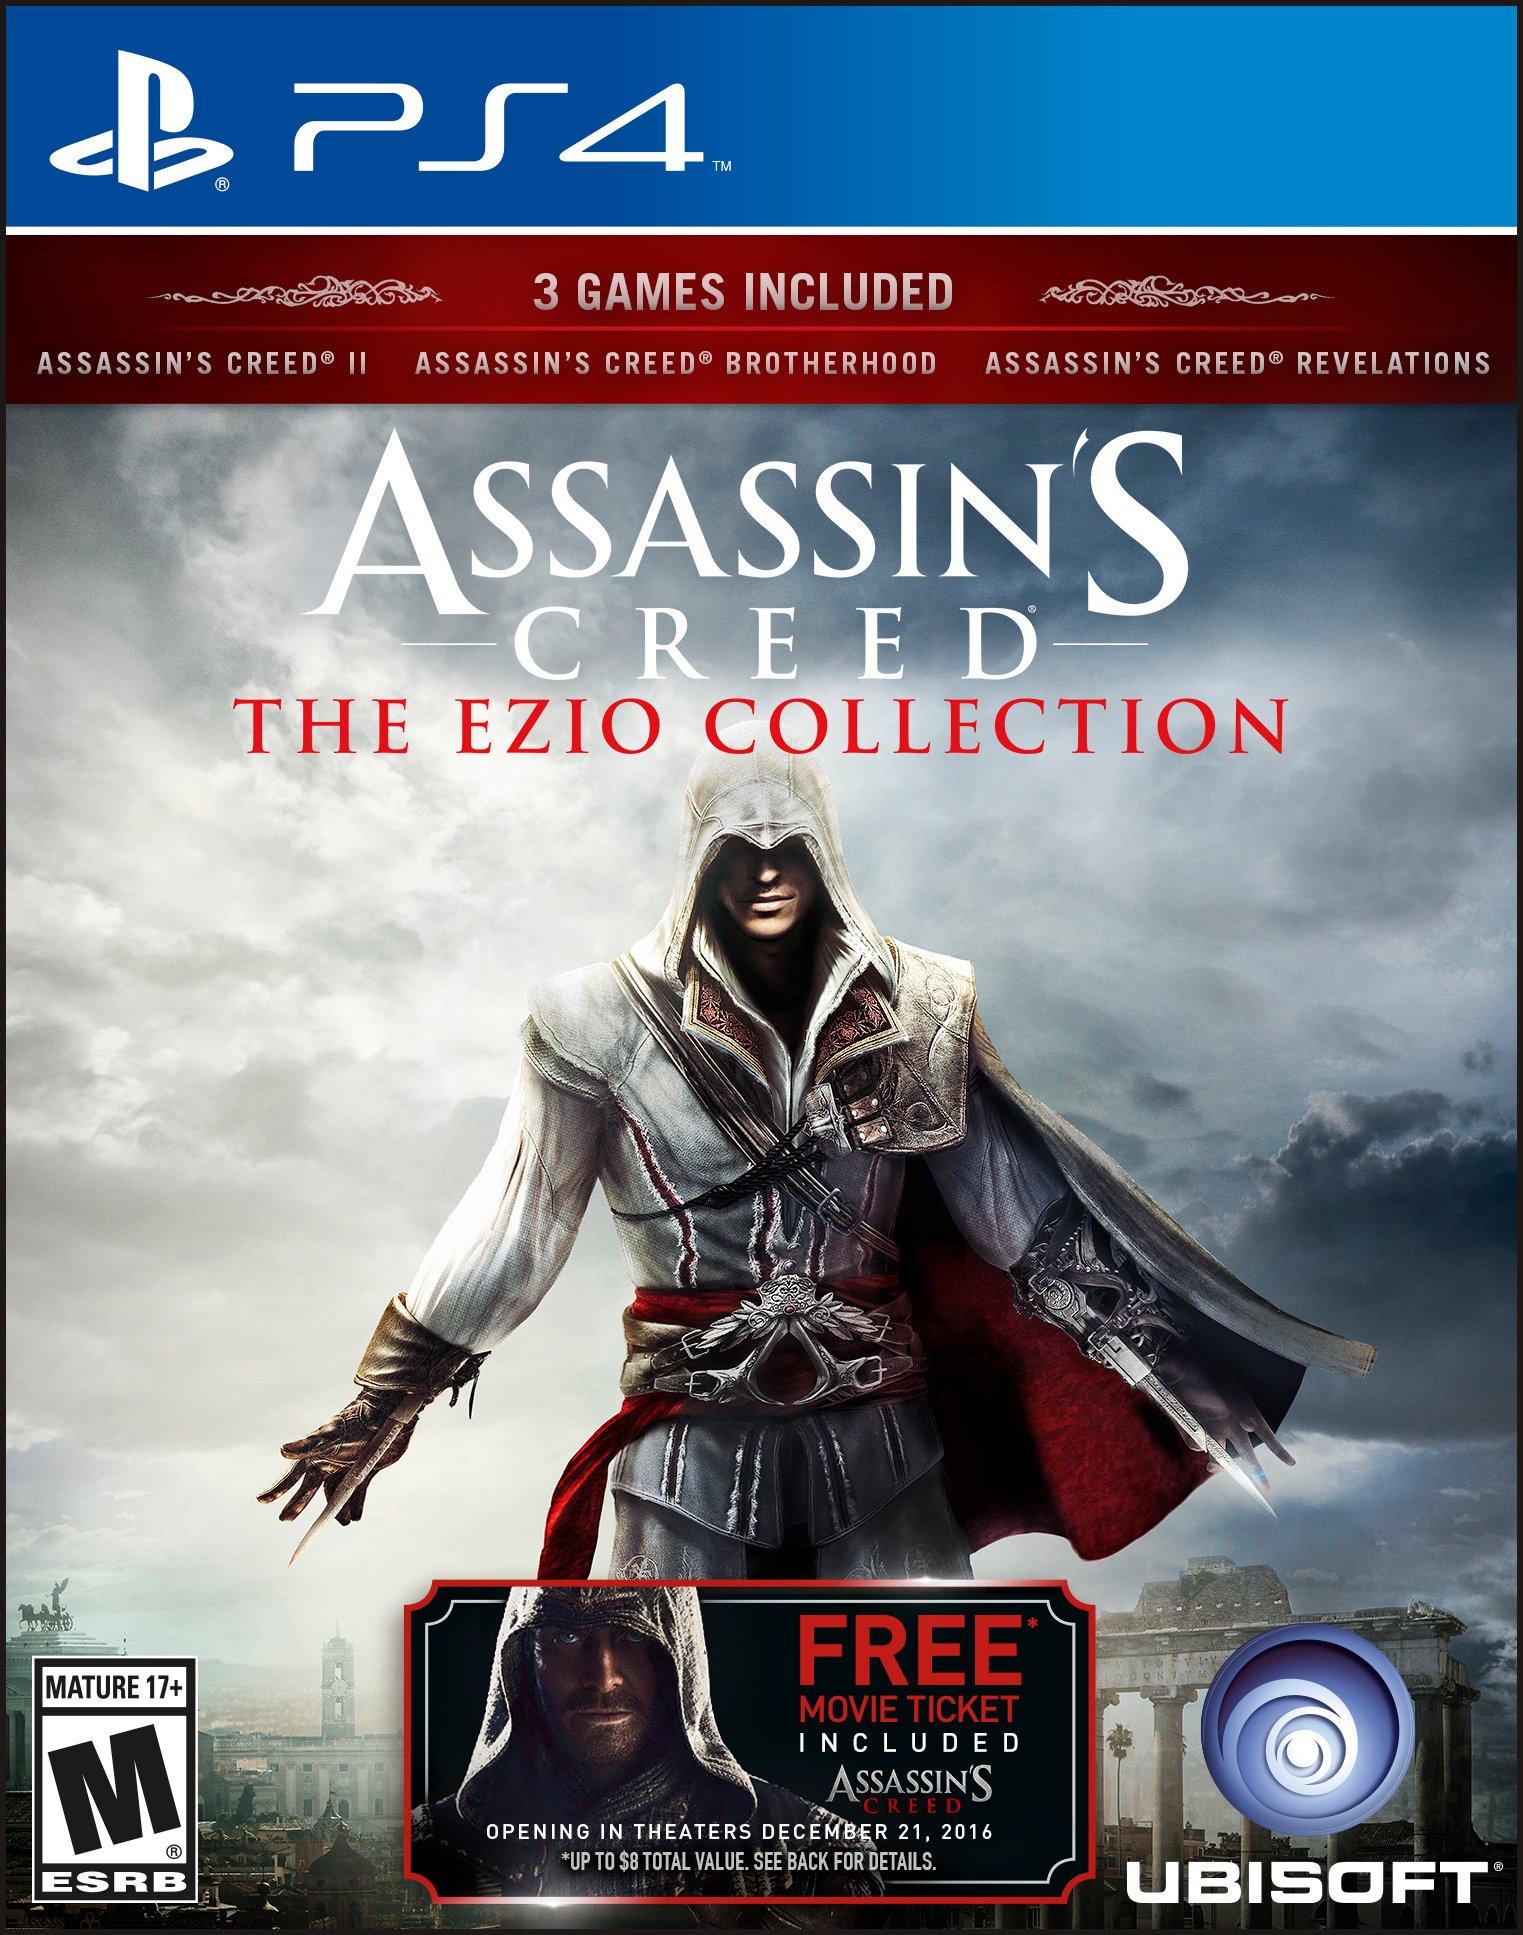 assassin's creed ps4 games